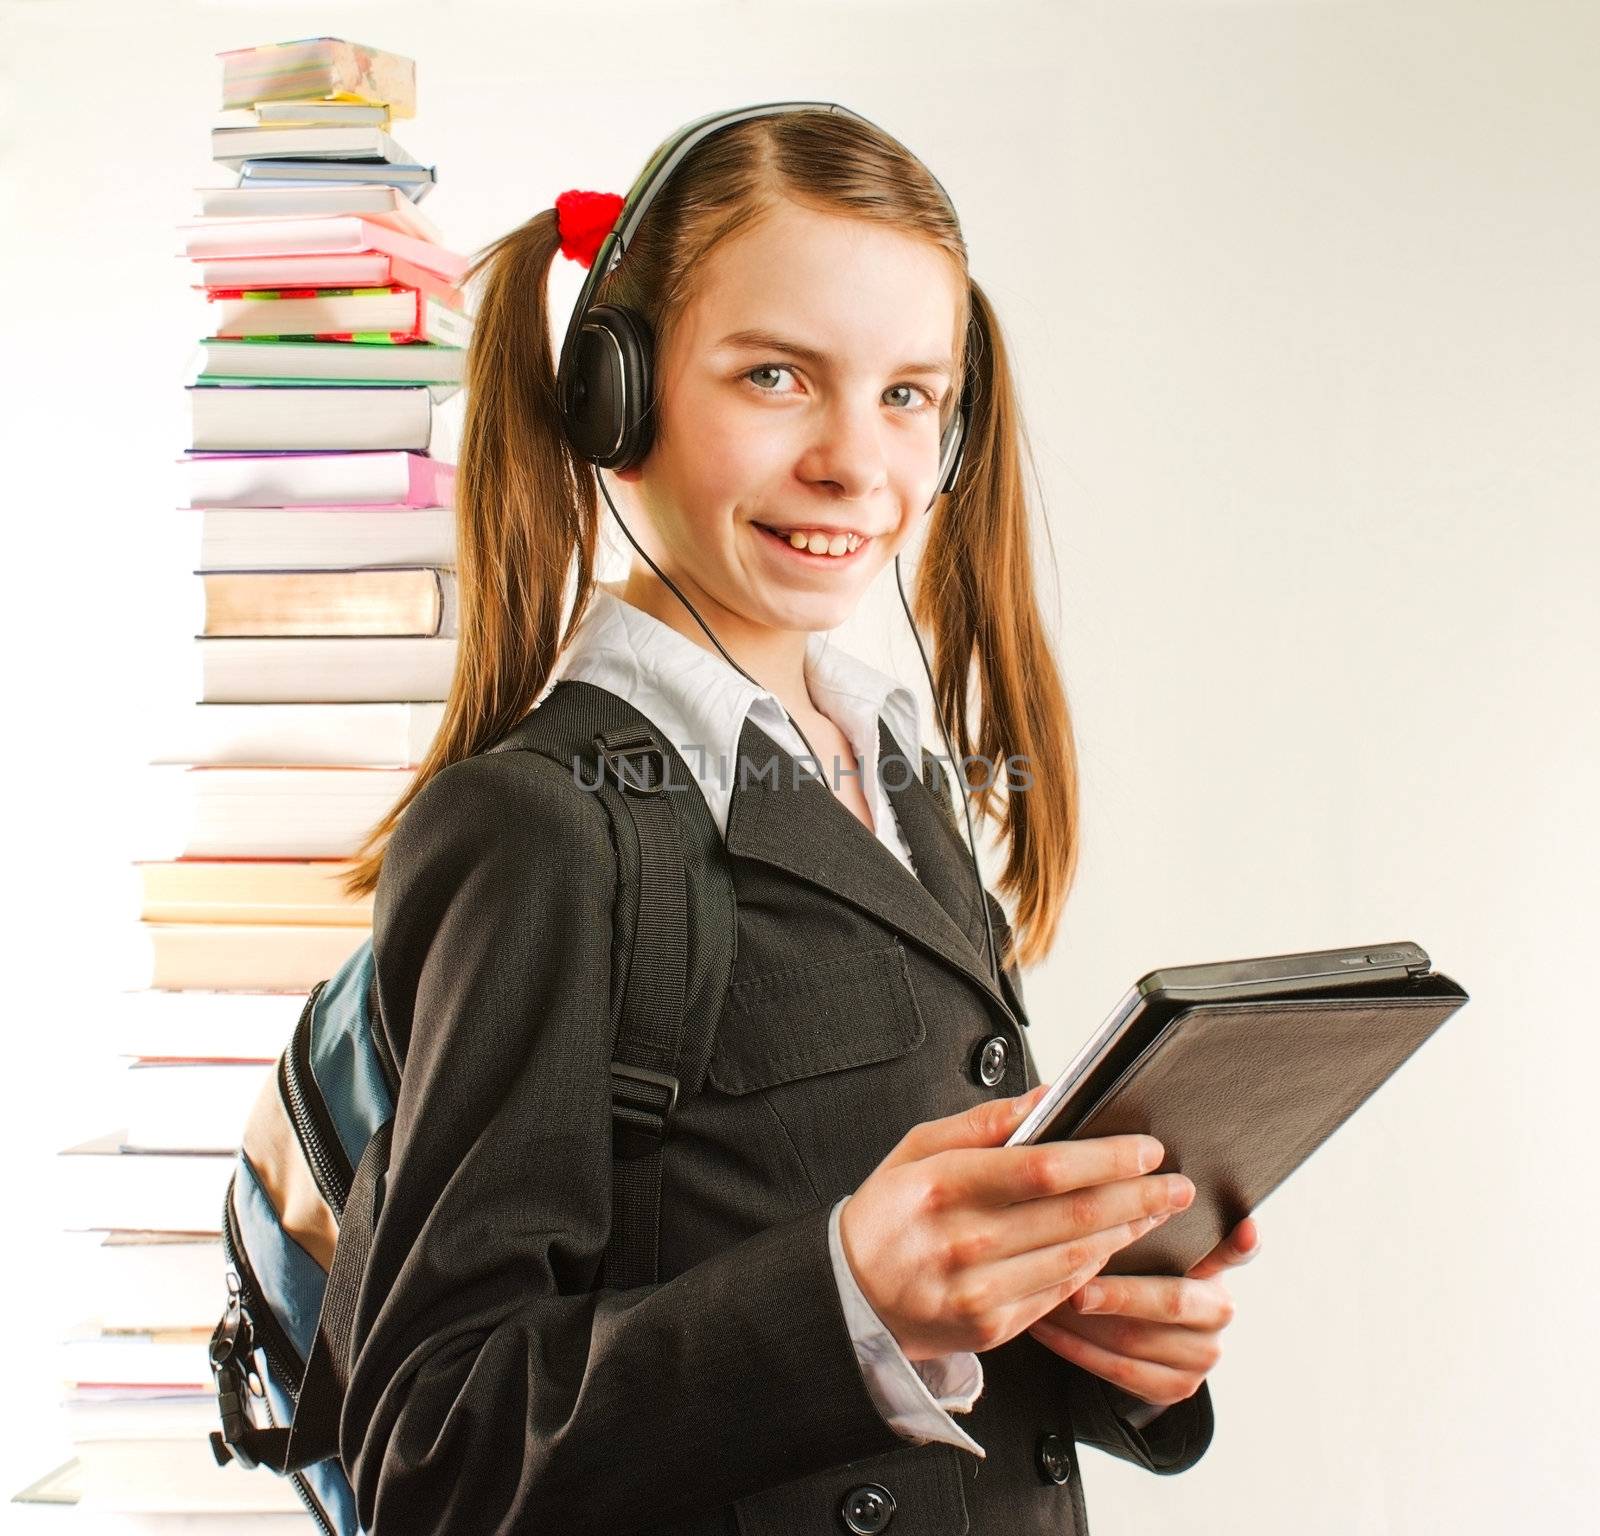 Teen girl with electronic book with a stack of printed books behind